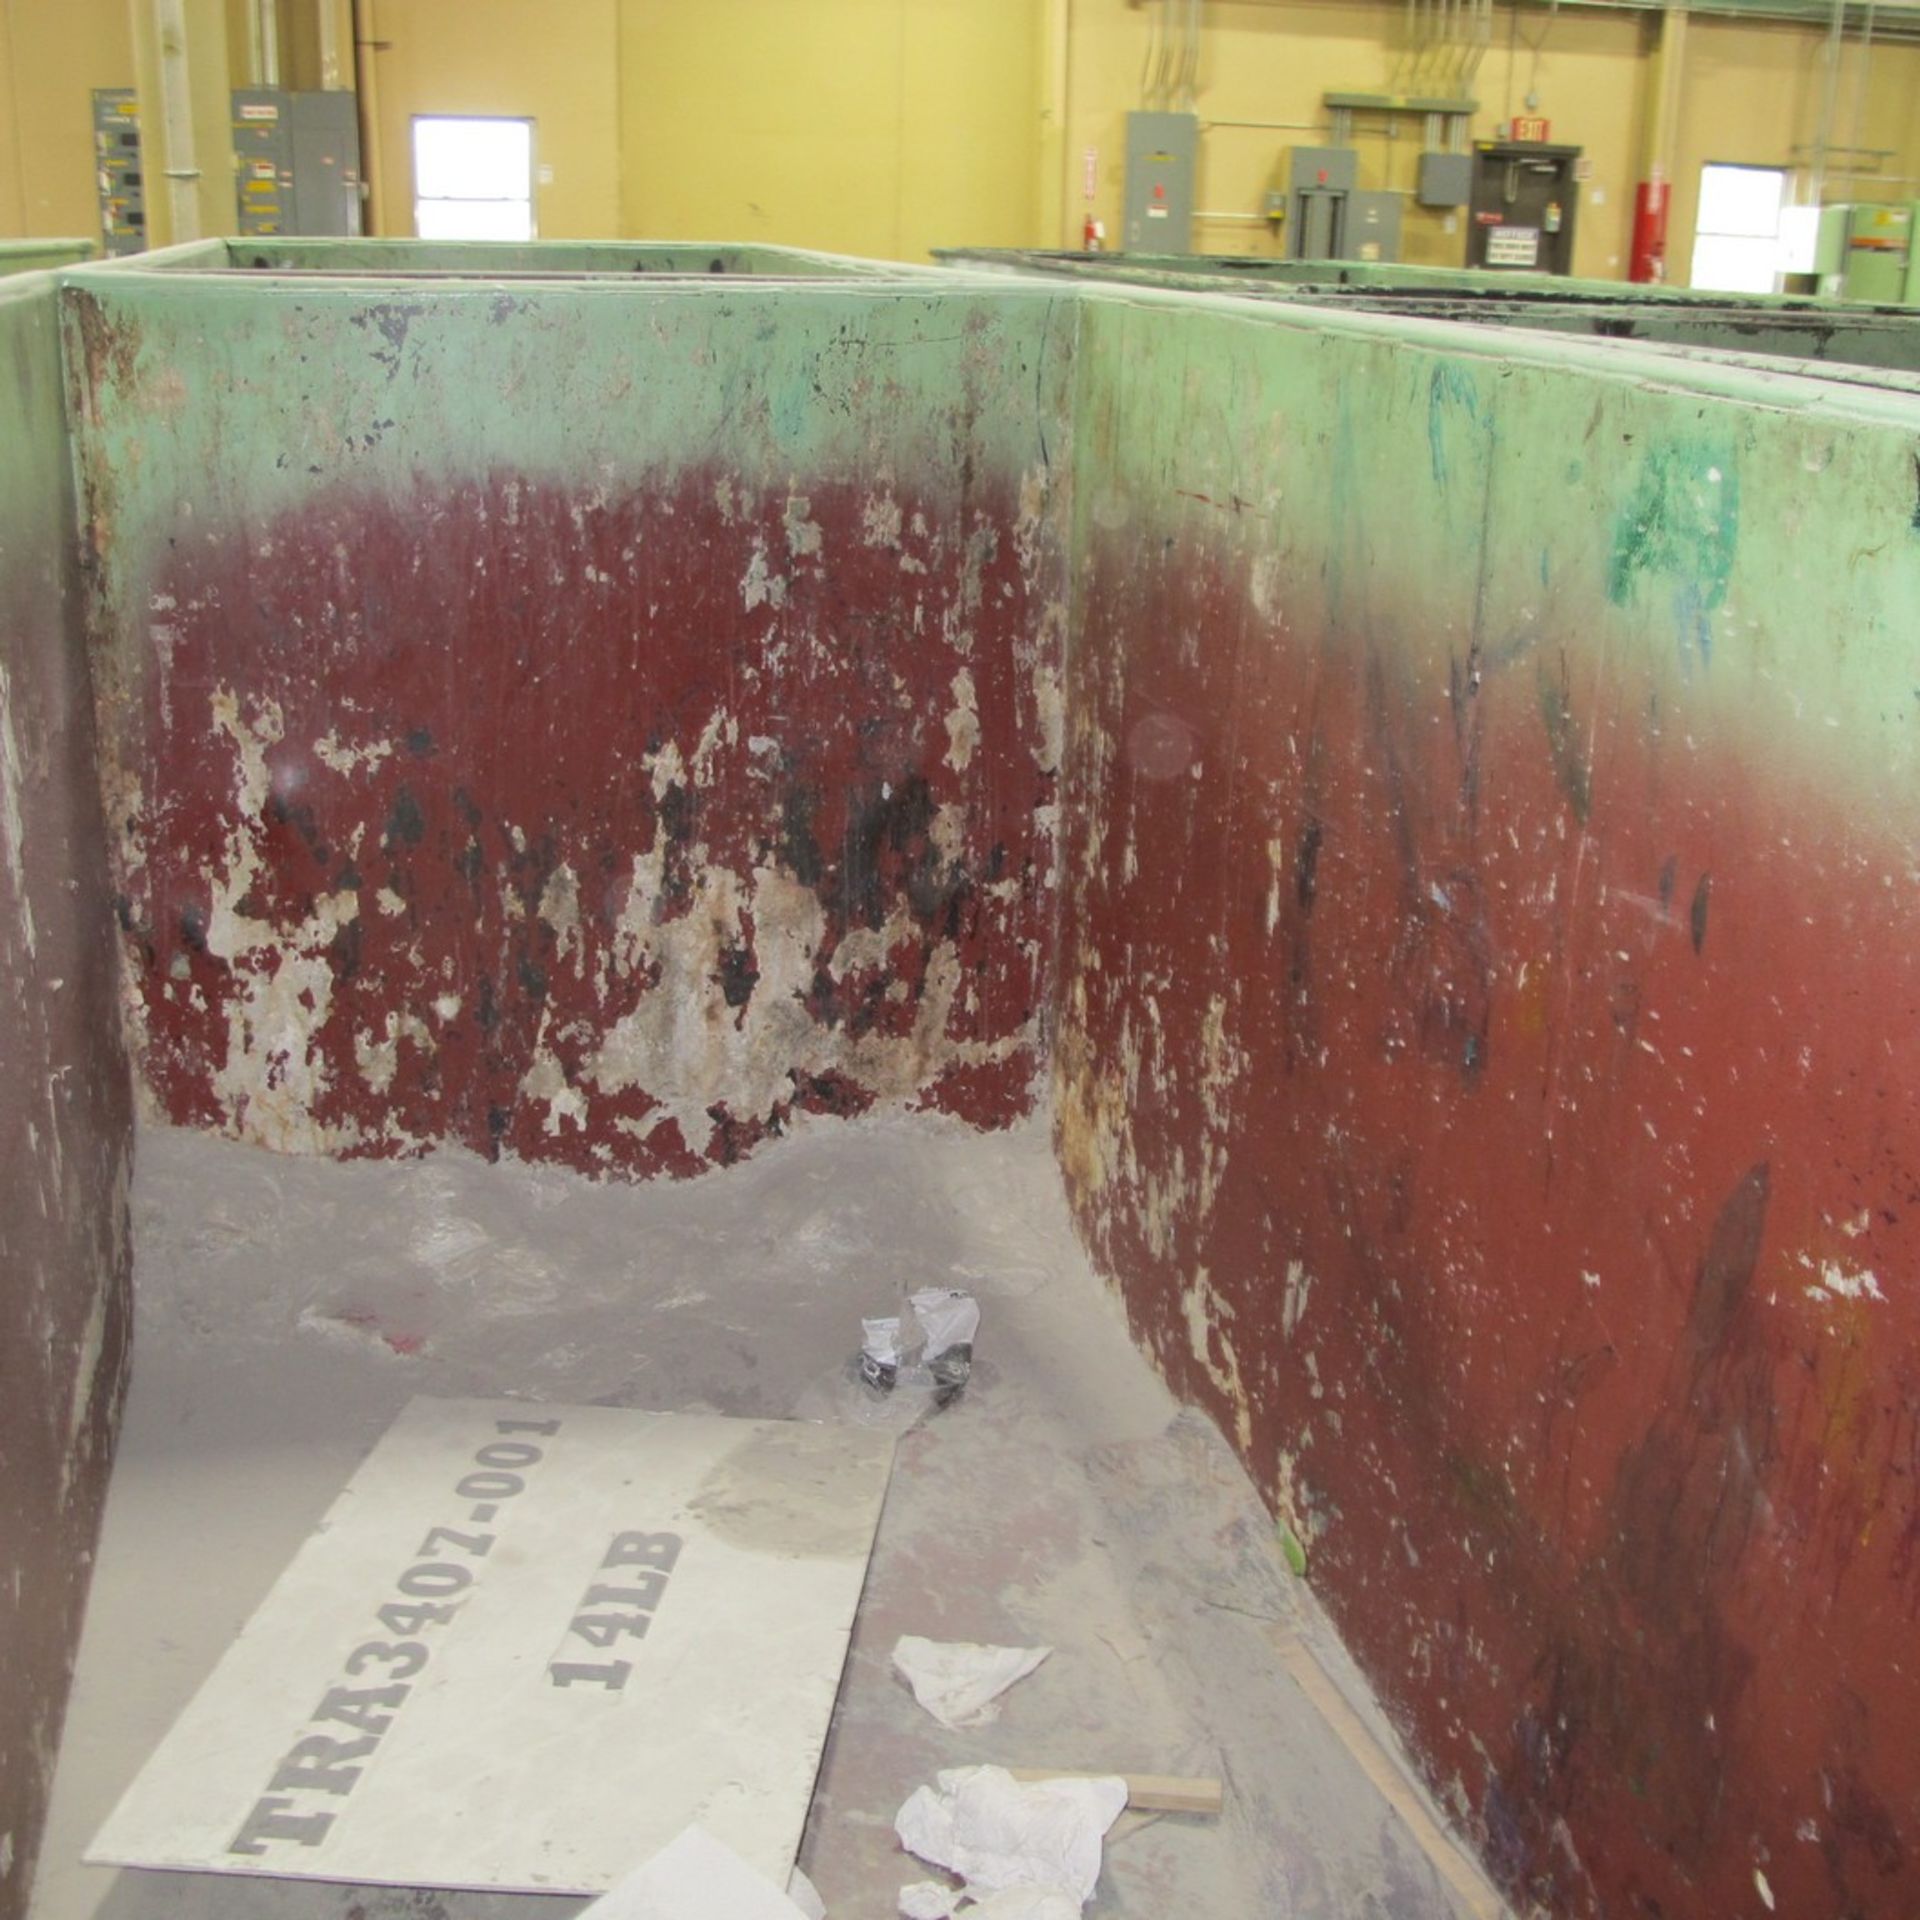 METAL TRANSFER BIN ON CASTERS, APPROX. 48"W X 92"L X 52"H (EAST NORTH PLANT) - Image 2 of 2